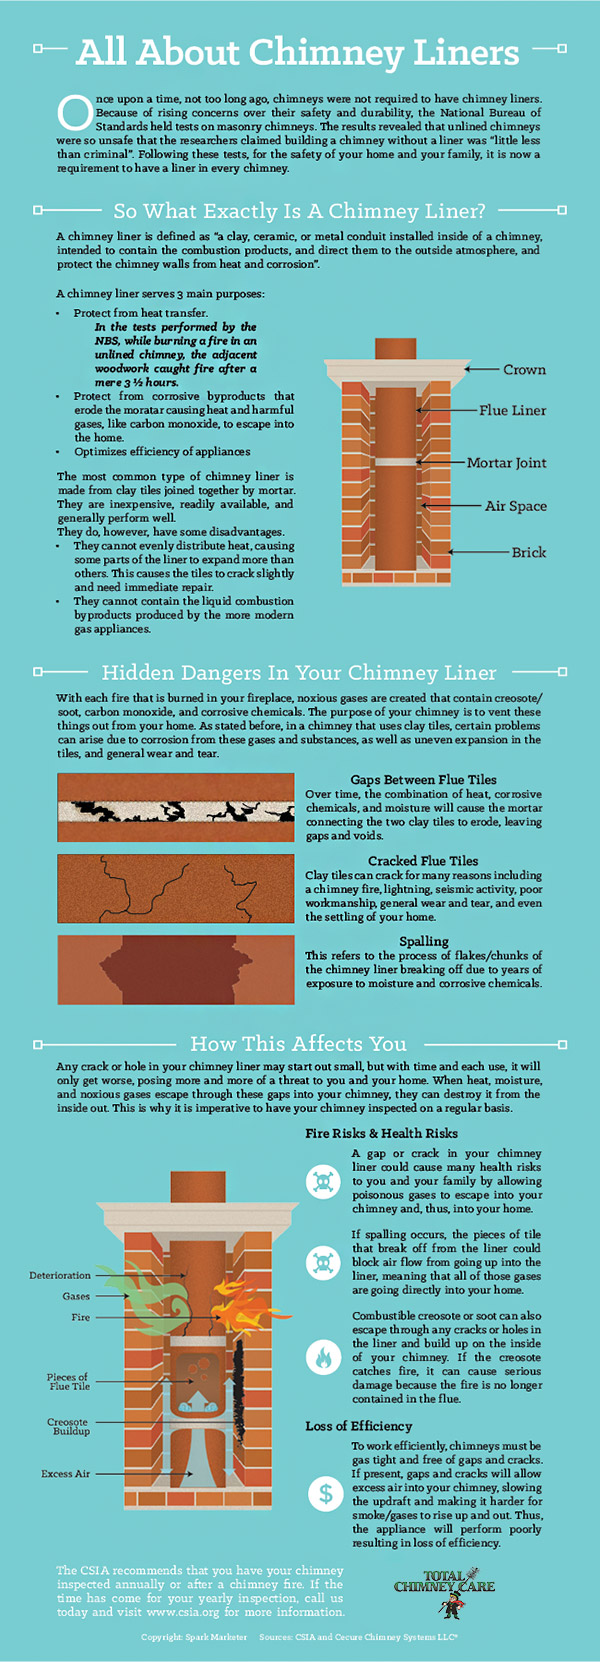 All-About-Chimney-Liners-New-Haven-Fairfield-CT-Total-Chimney-Care